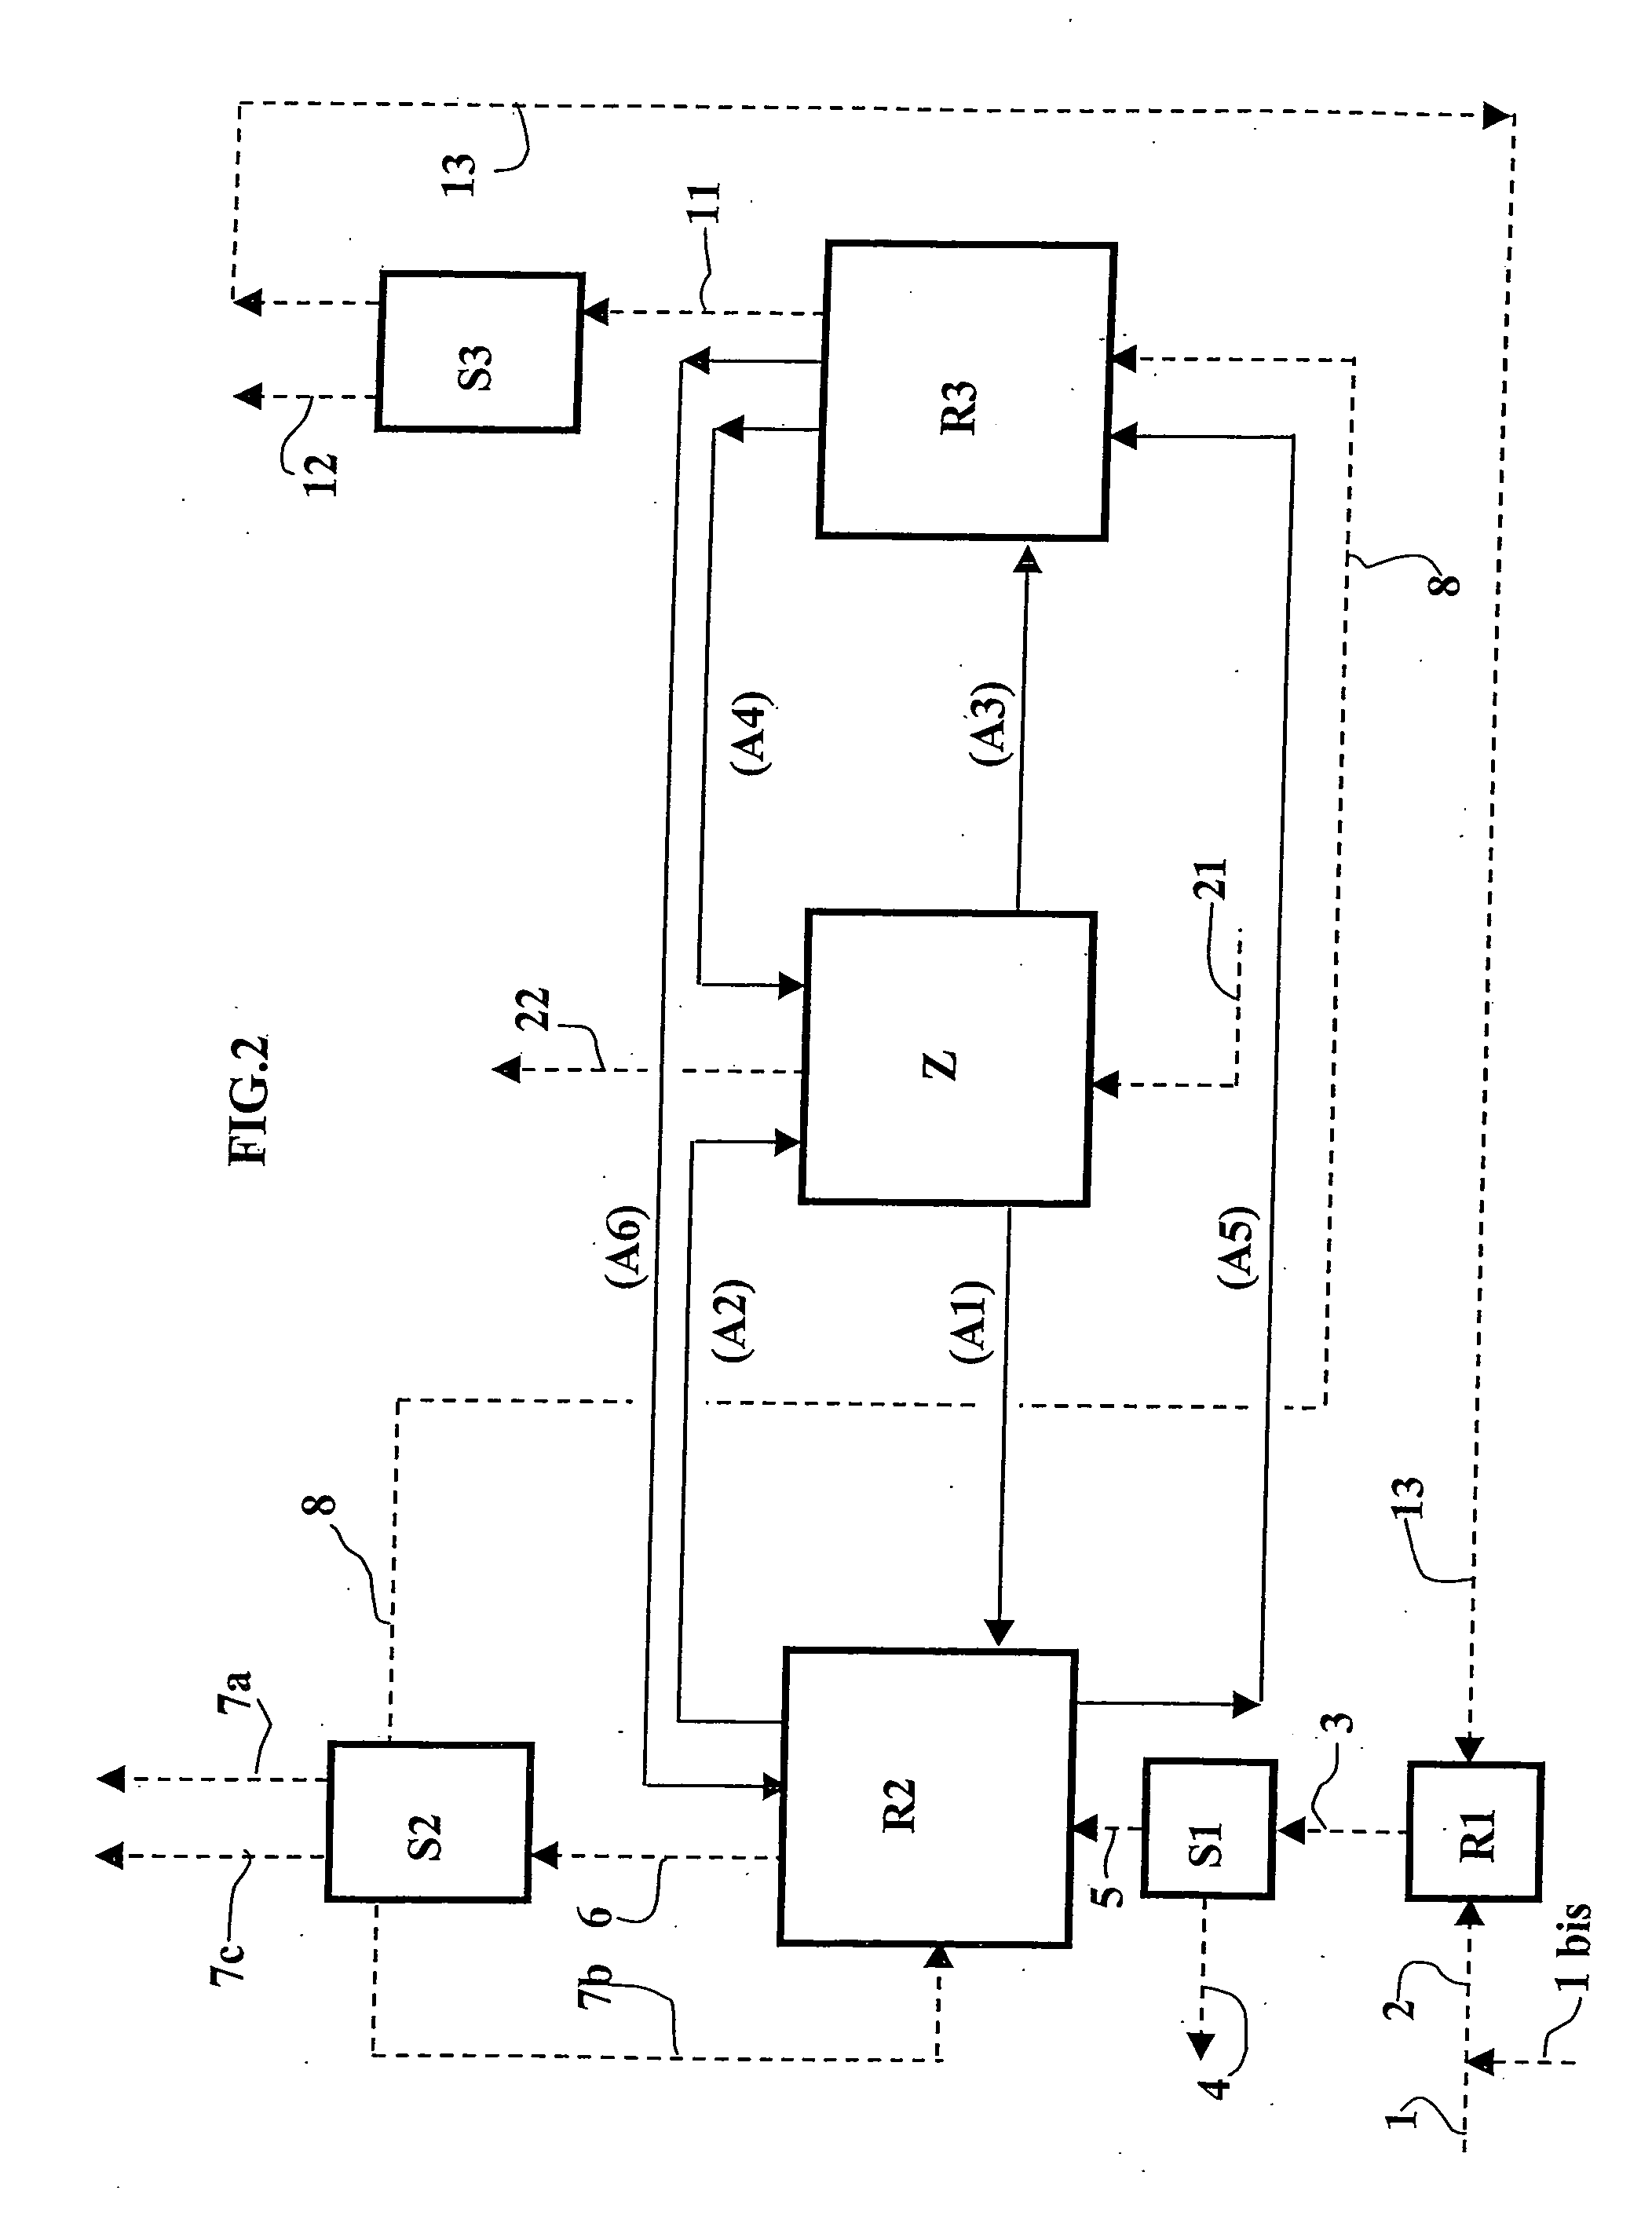 Process for multistage conversion of a charge comprising olefins with four, five or more carbon atoms, with the aim of producing propylene